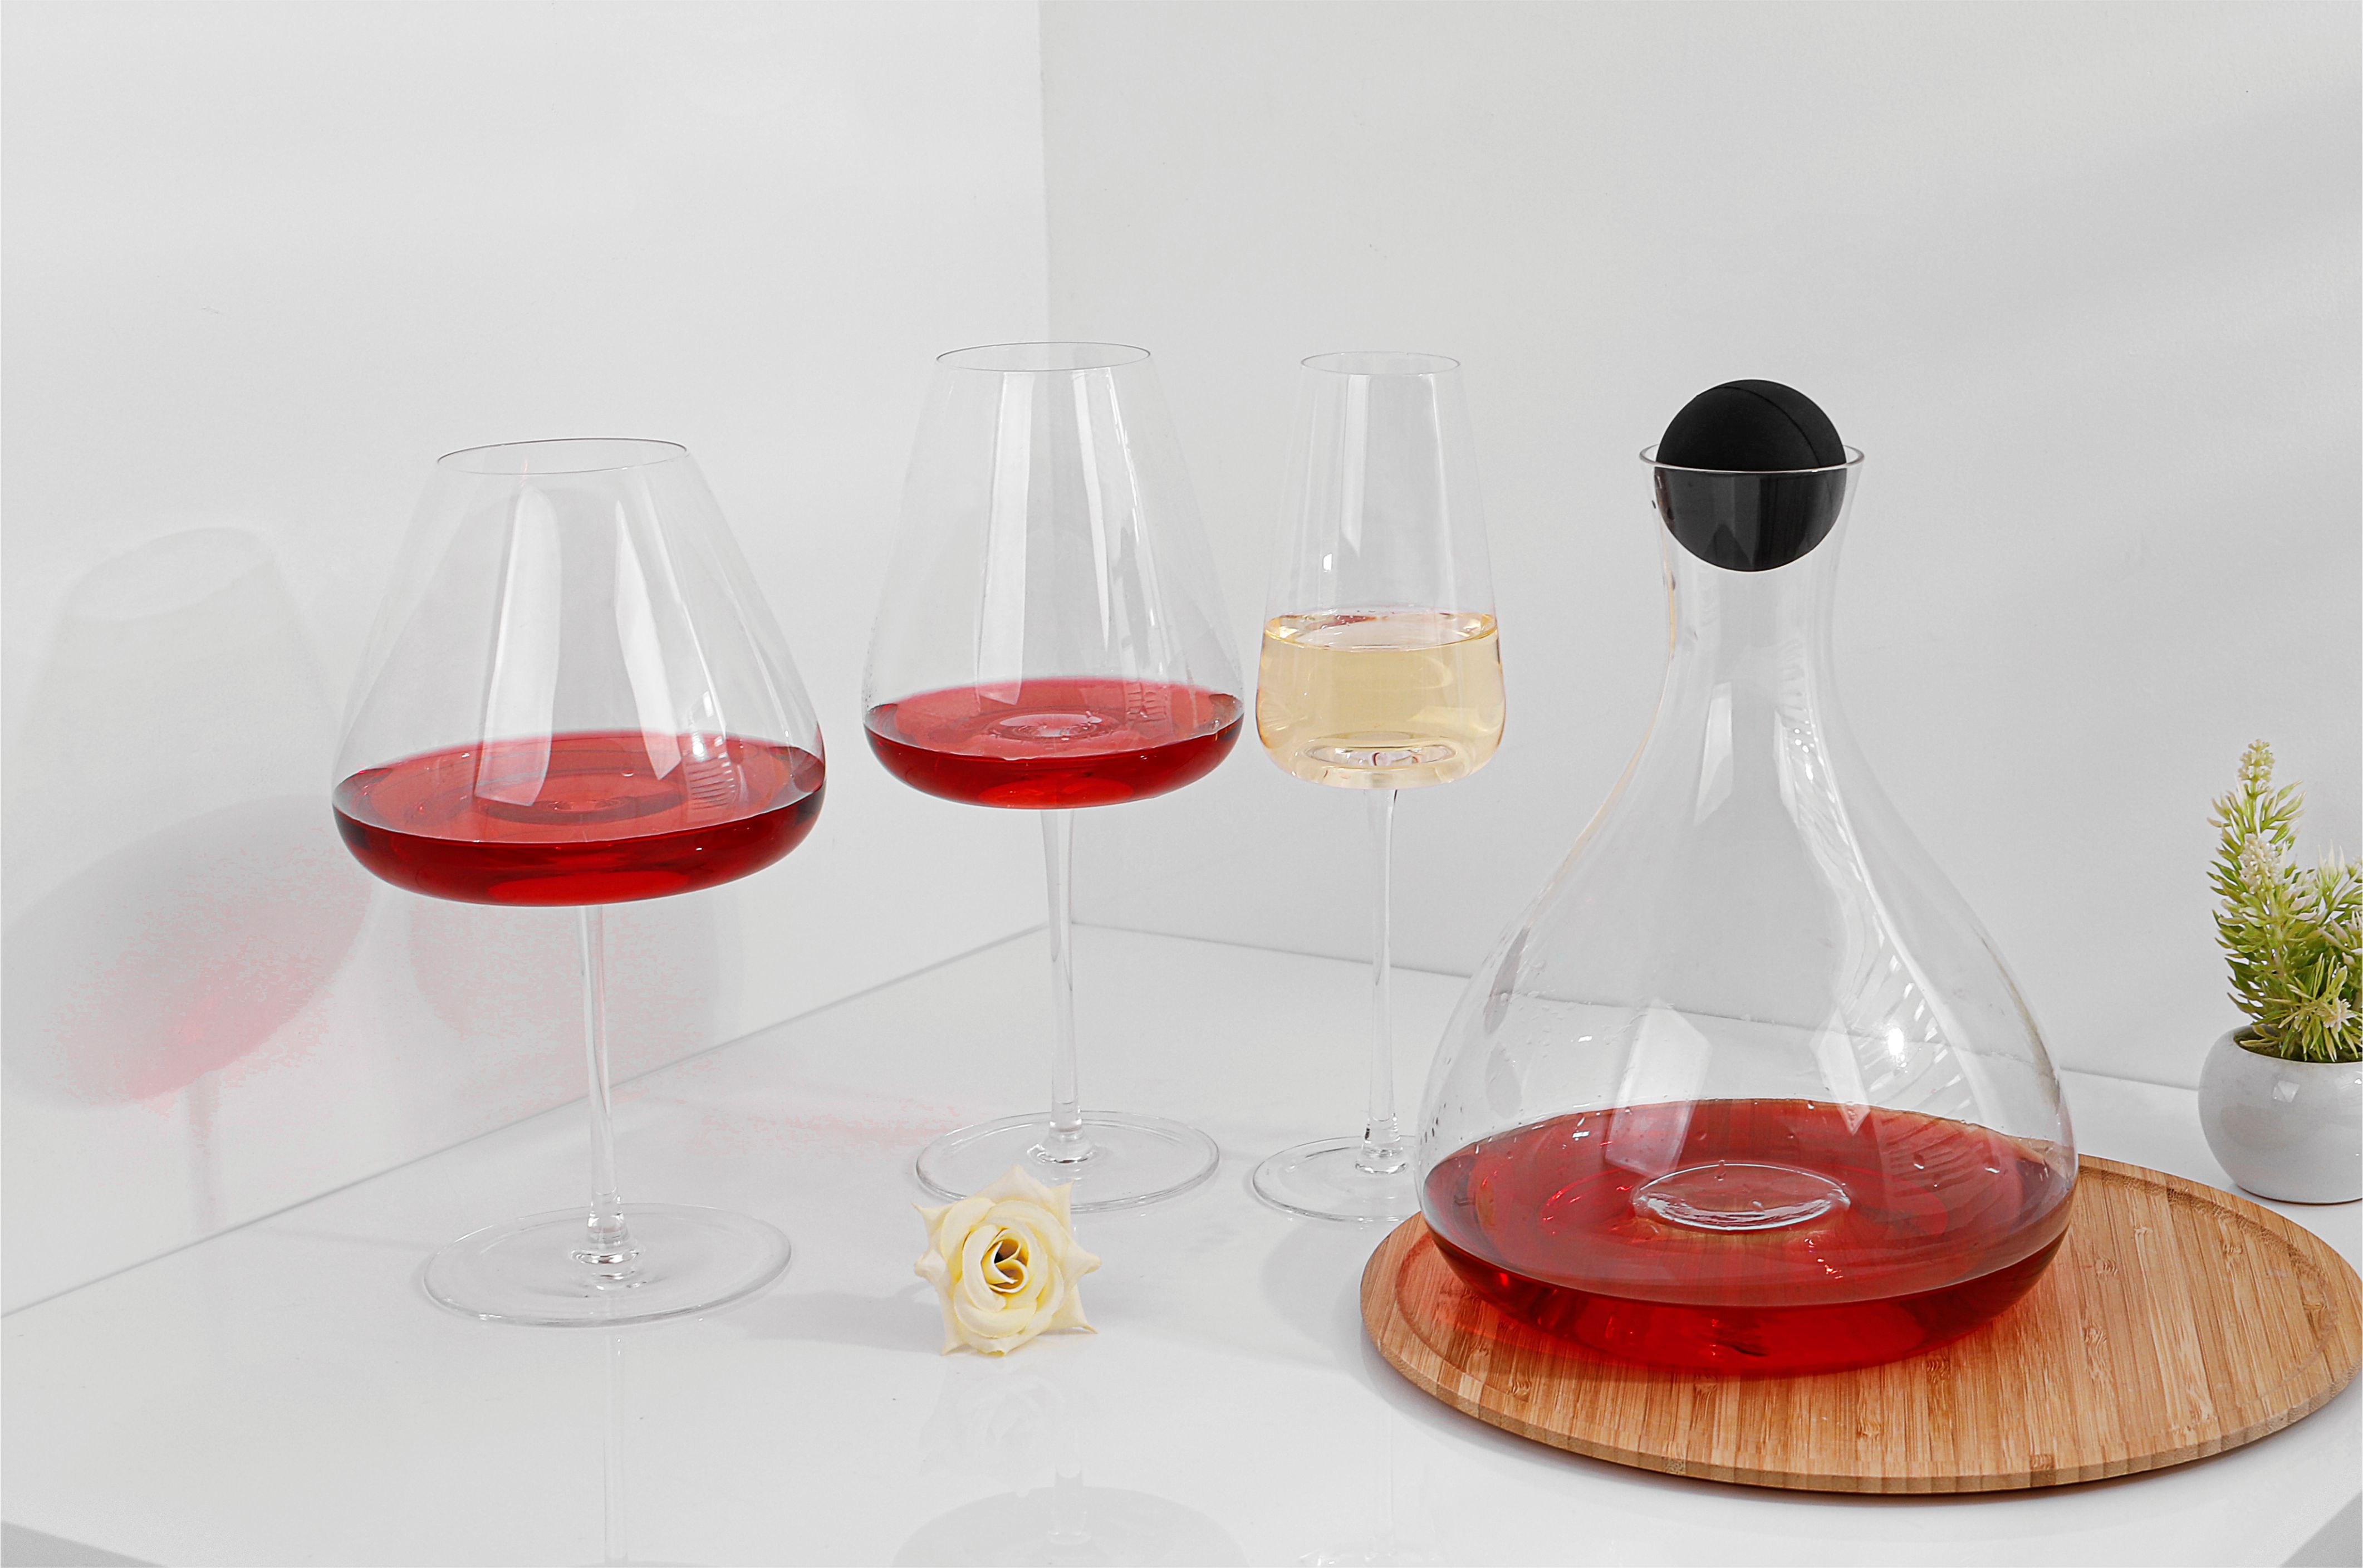 New design drinking set and red wine glasses.